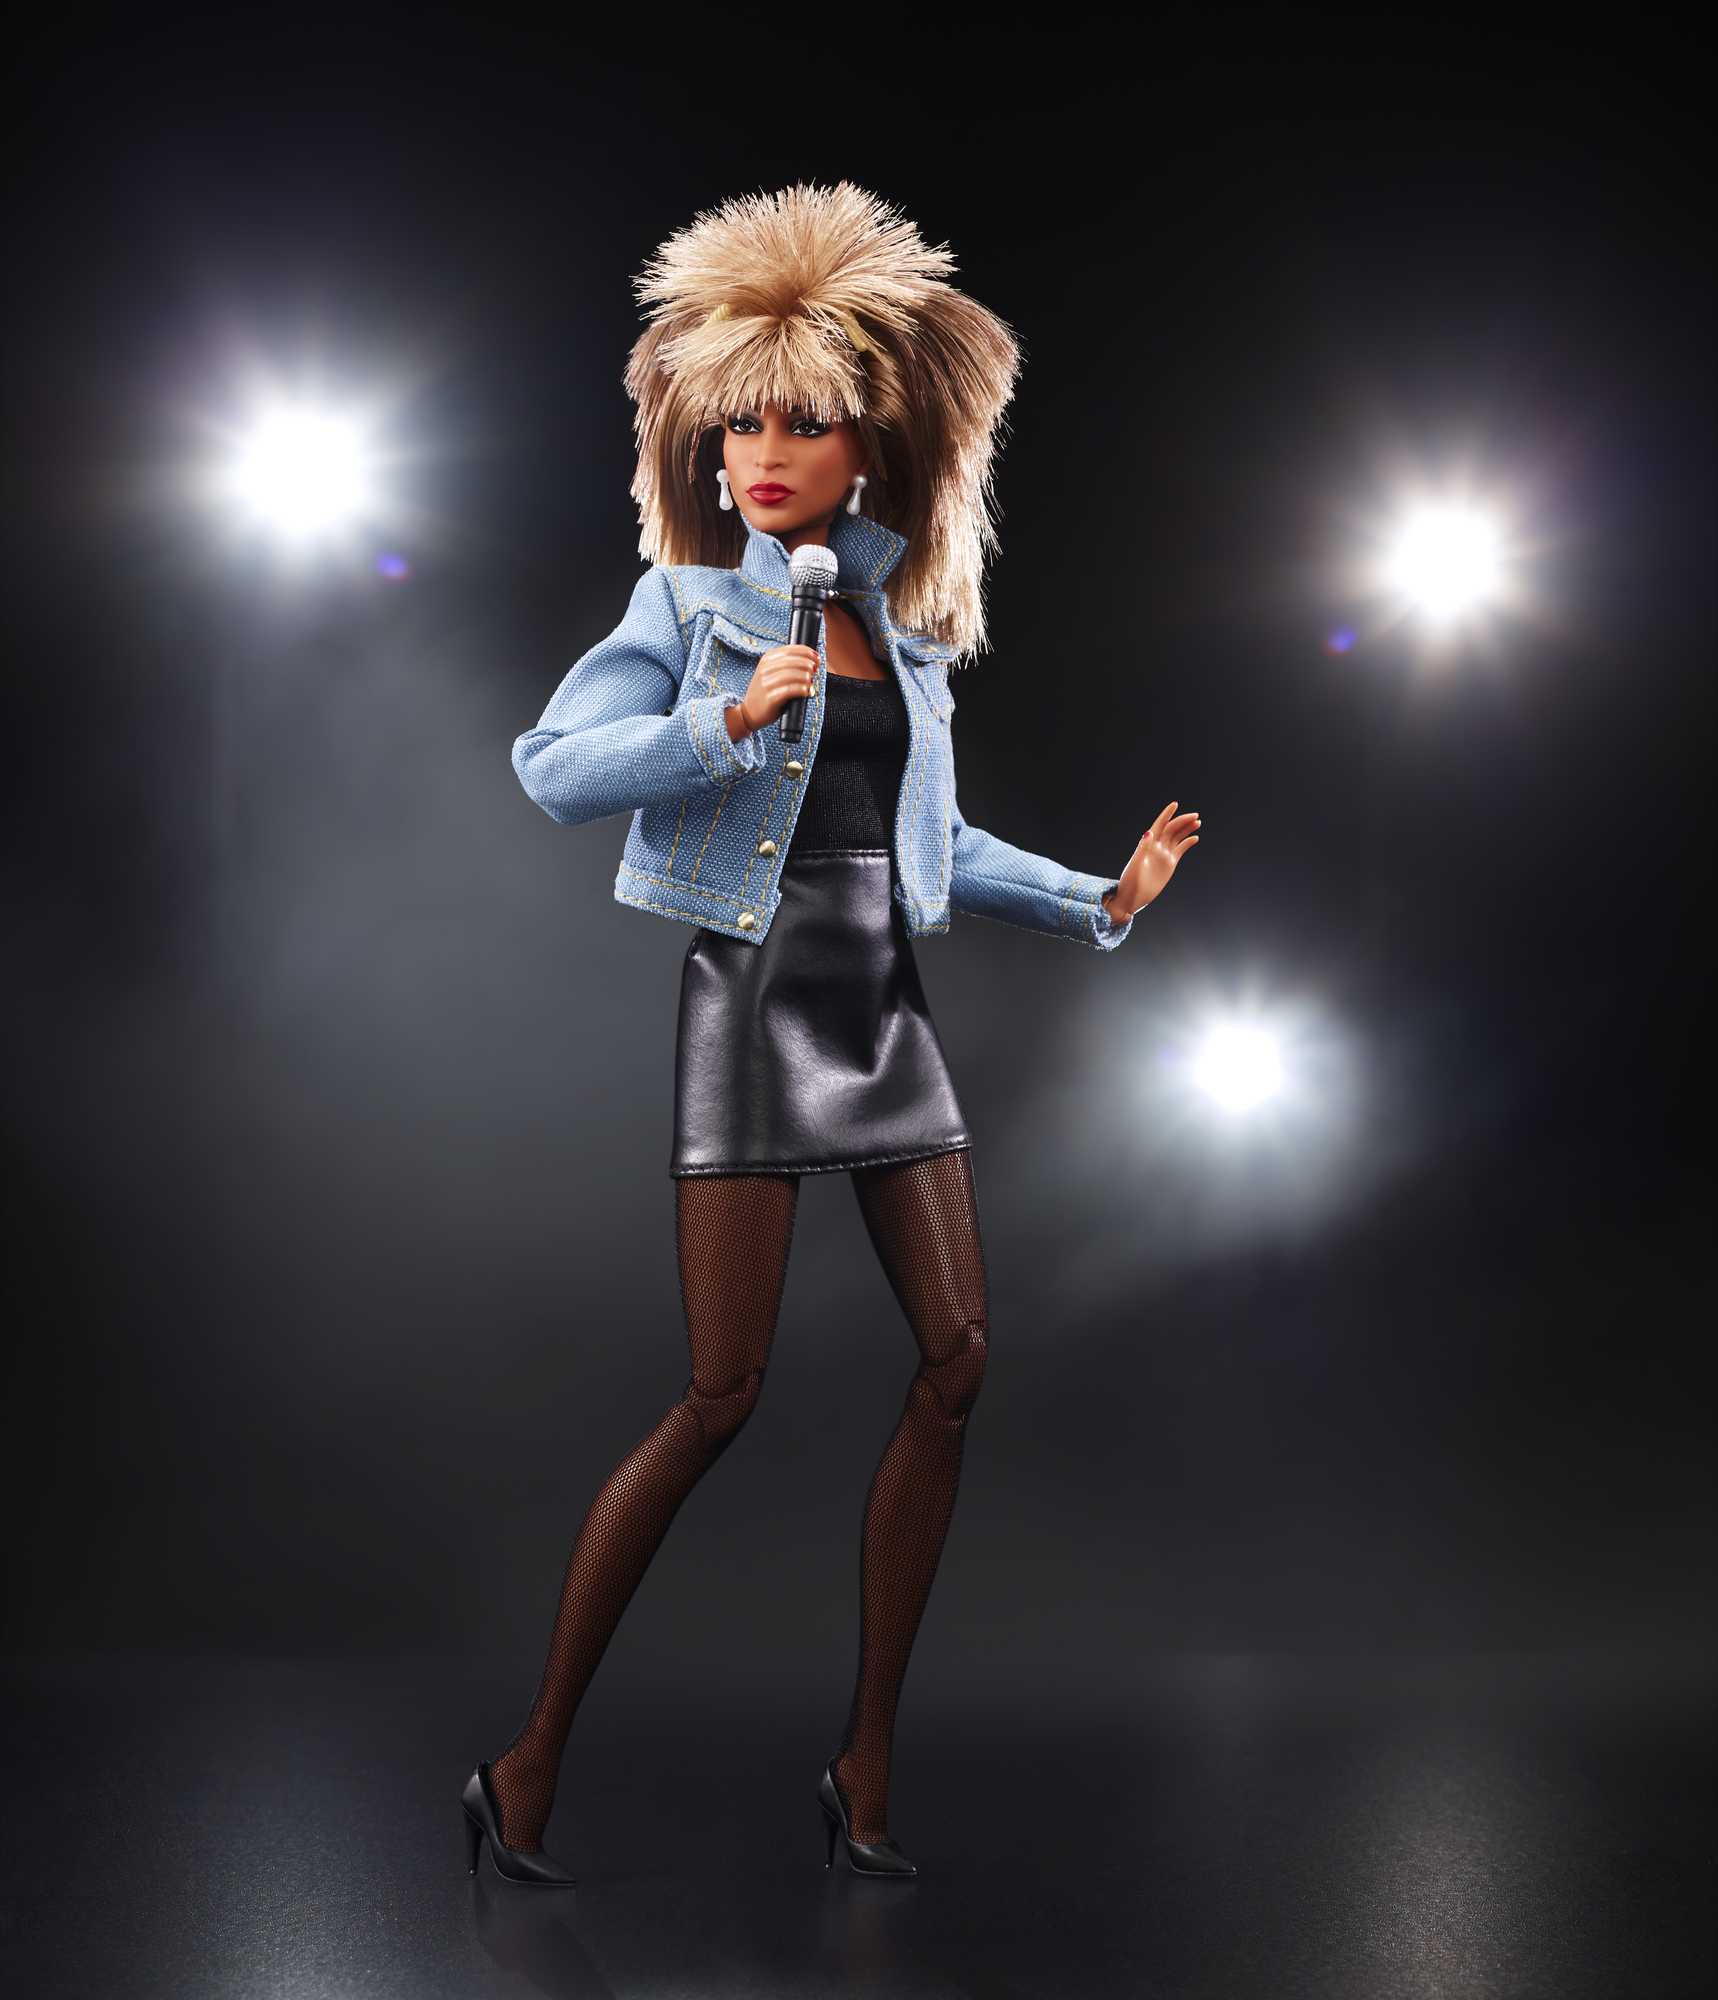 Barbie Signature Tina Turner Barbie Doll in ‘90s Fashion, Gift for Collectors - image 3 of 7